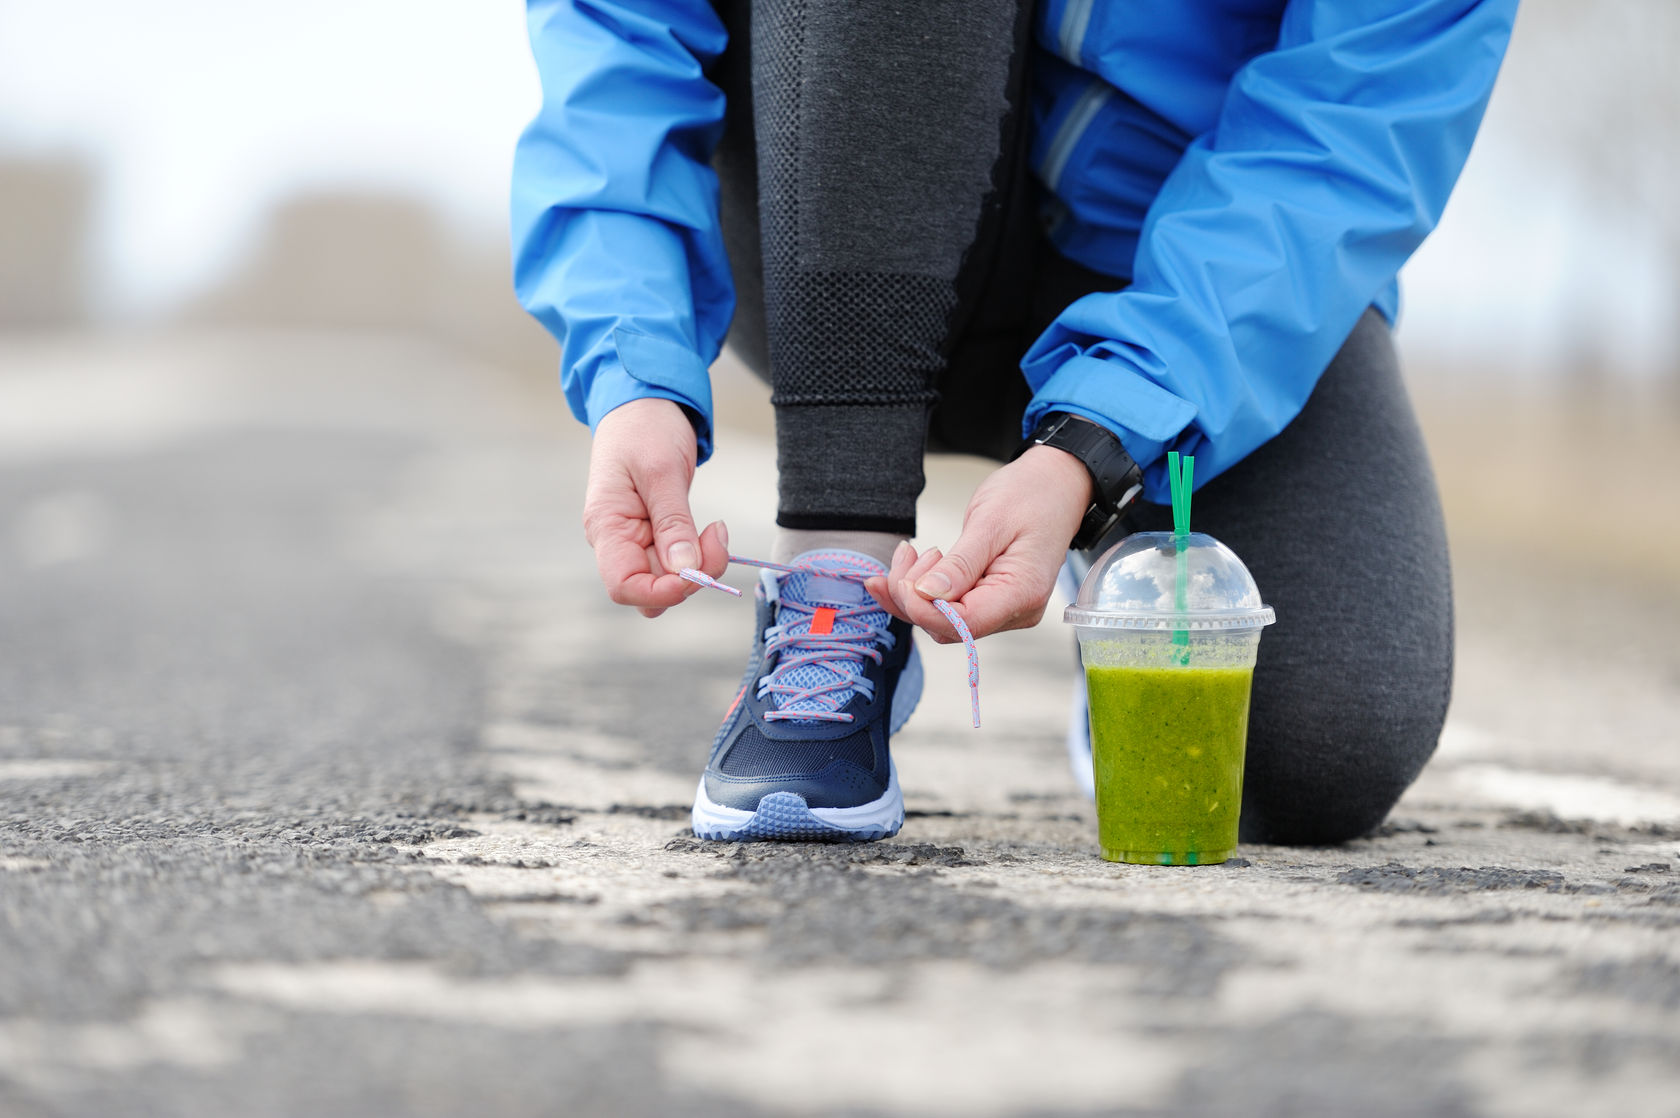 70543803 - green detox smoothie cup and woman lacing running shoes before workout. fitness and healthy lifestyle concept.